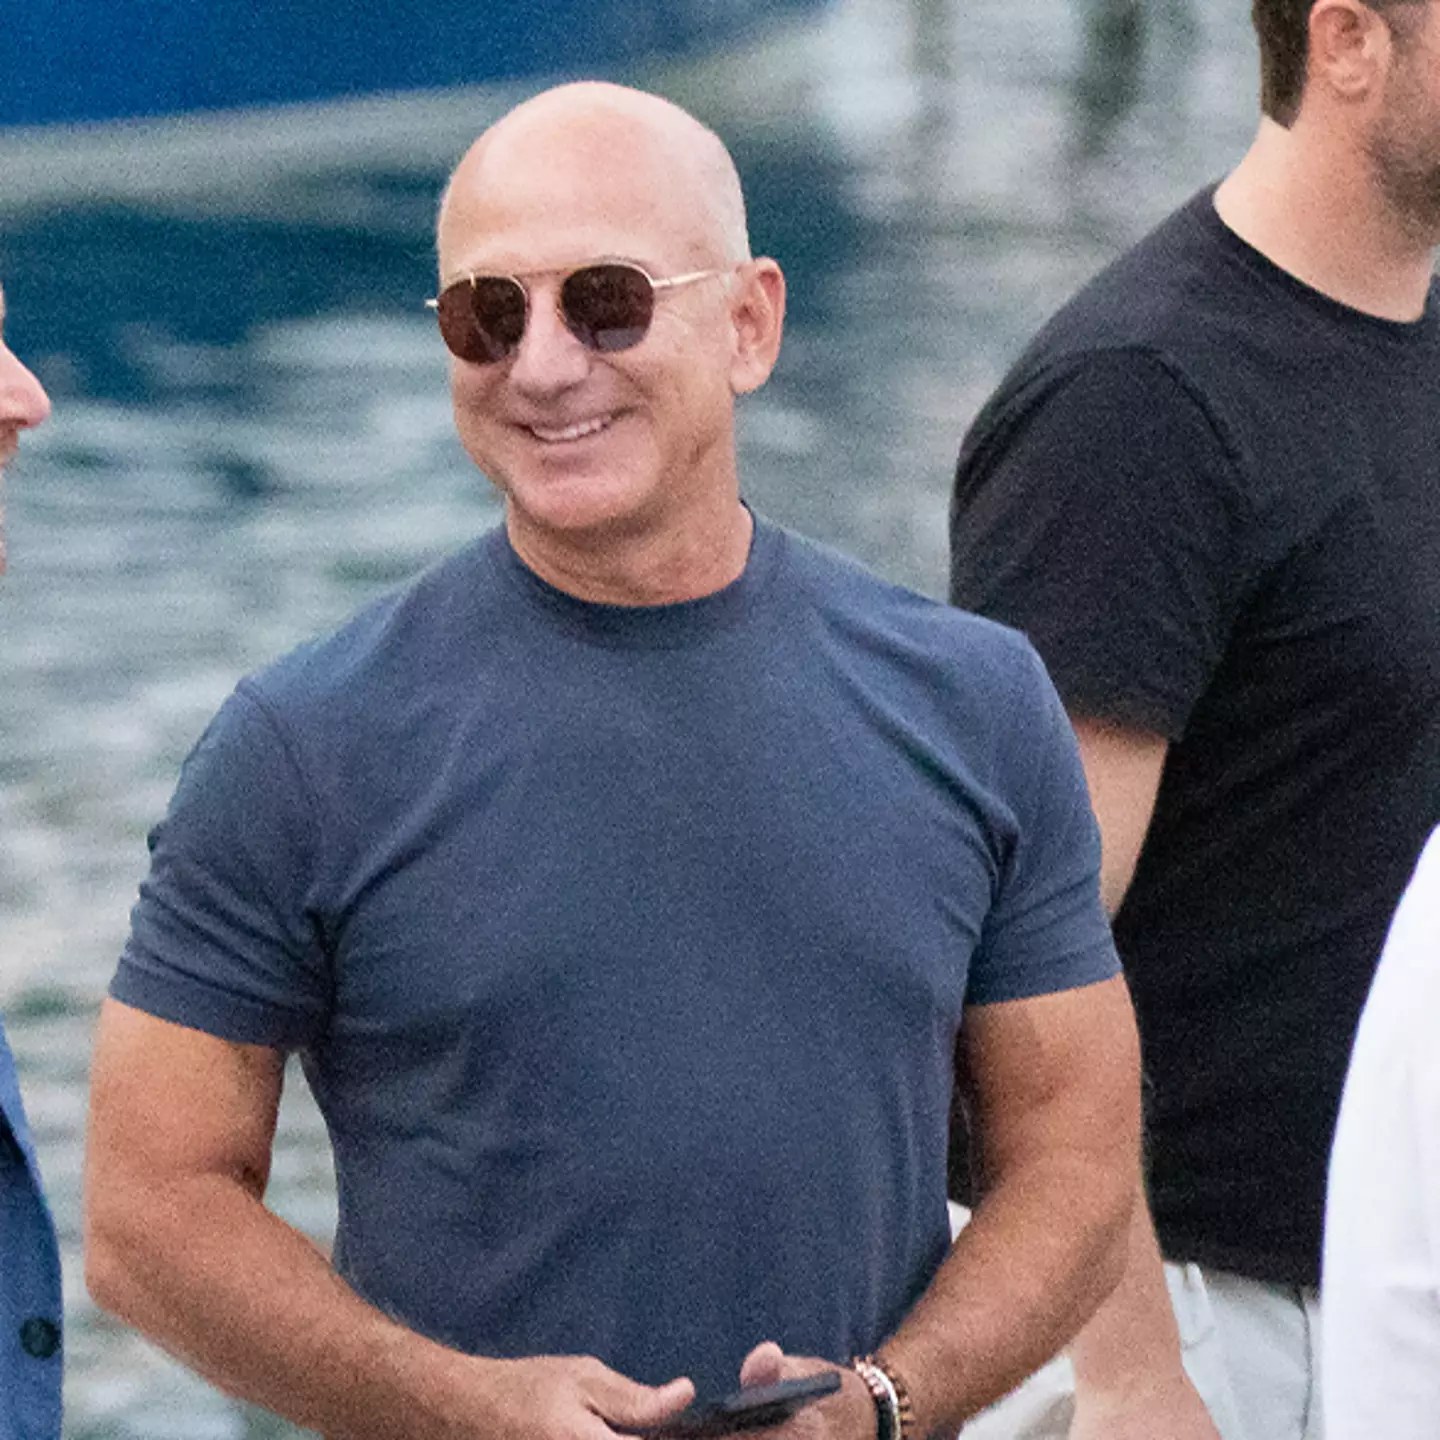 Jeff Bezos’ $75m yacht designed exclusively to support his $500m mega yacht spotted on video